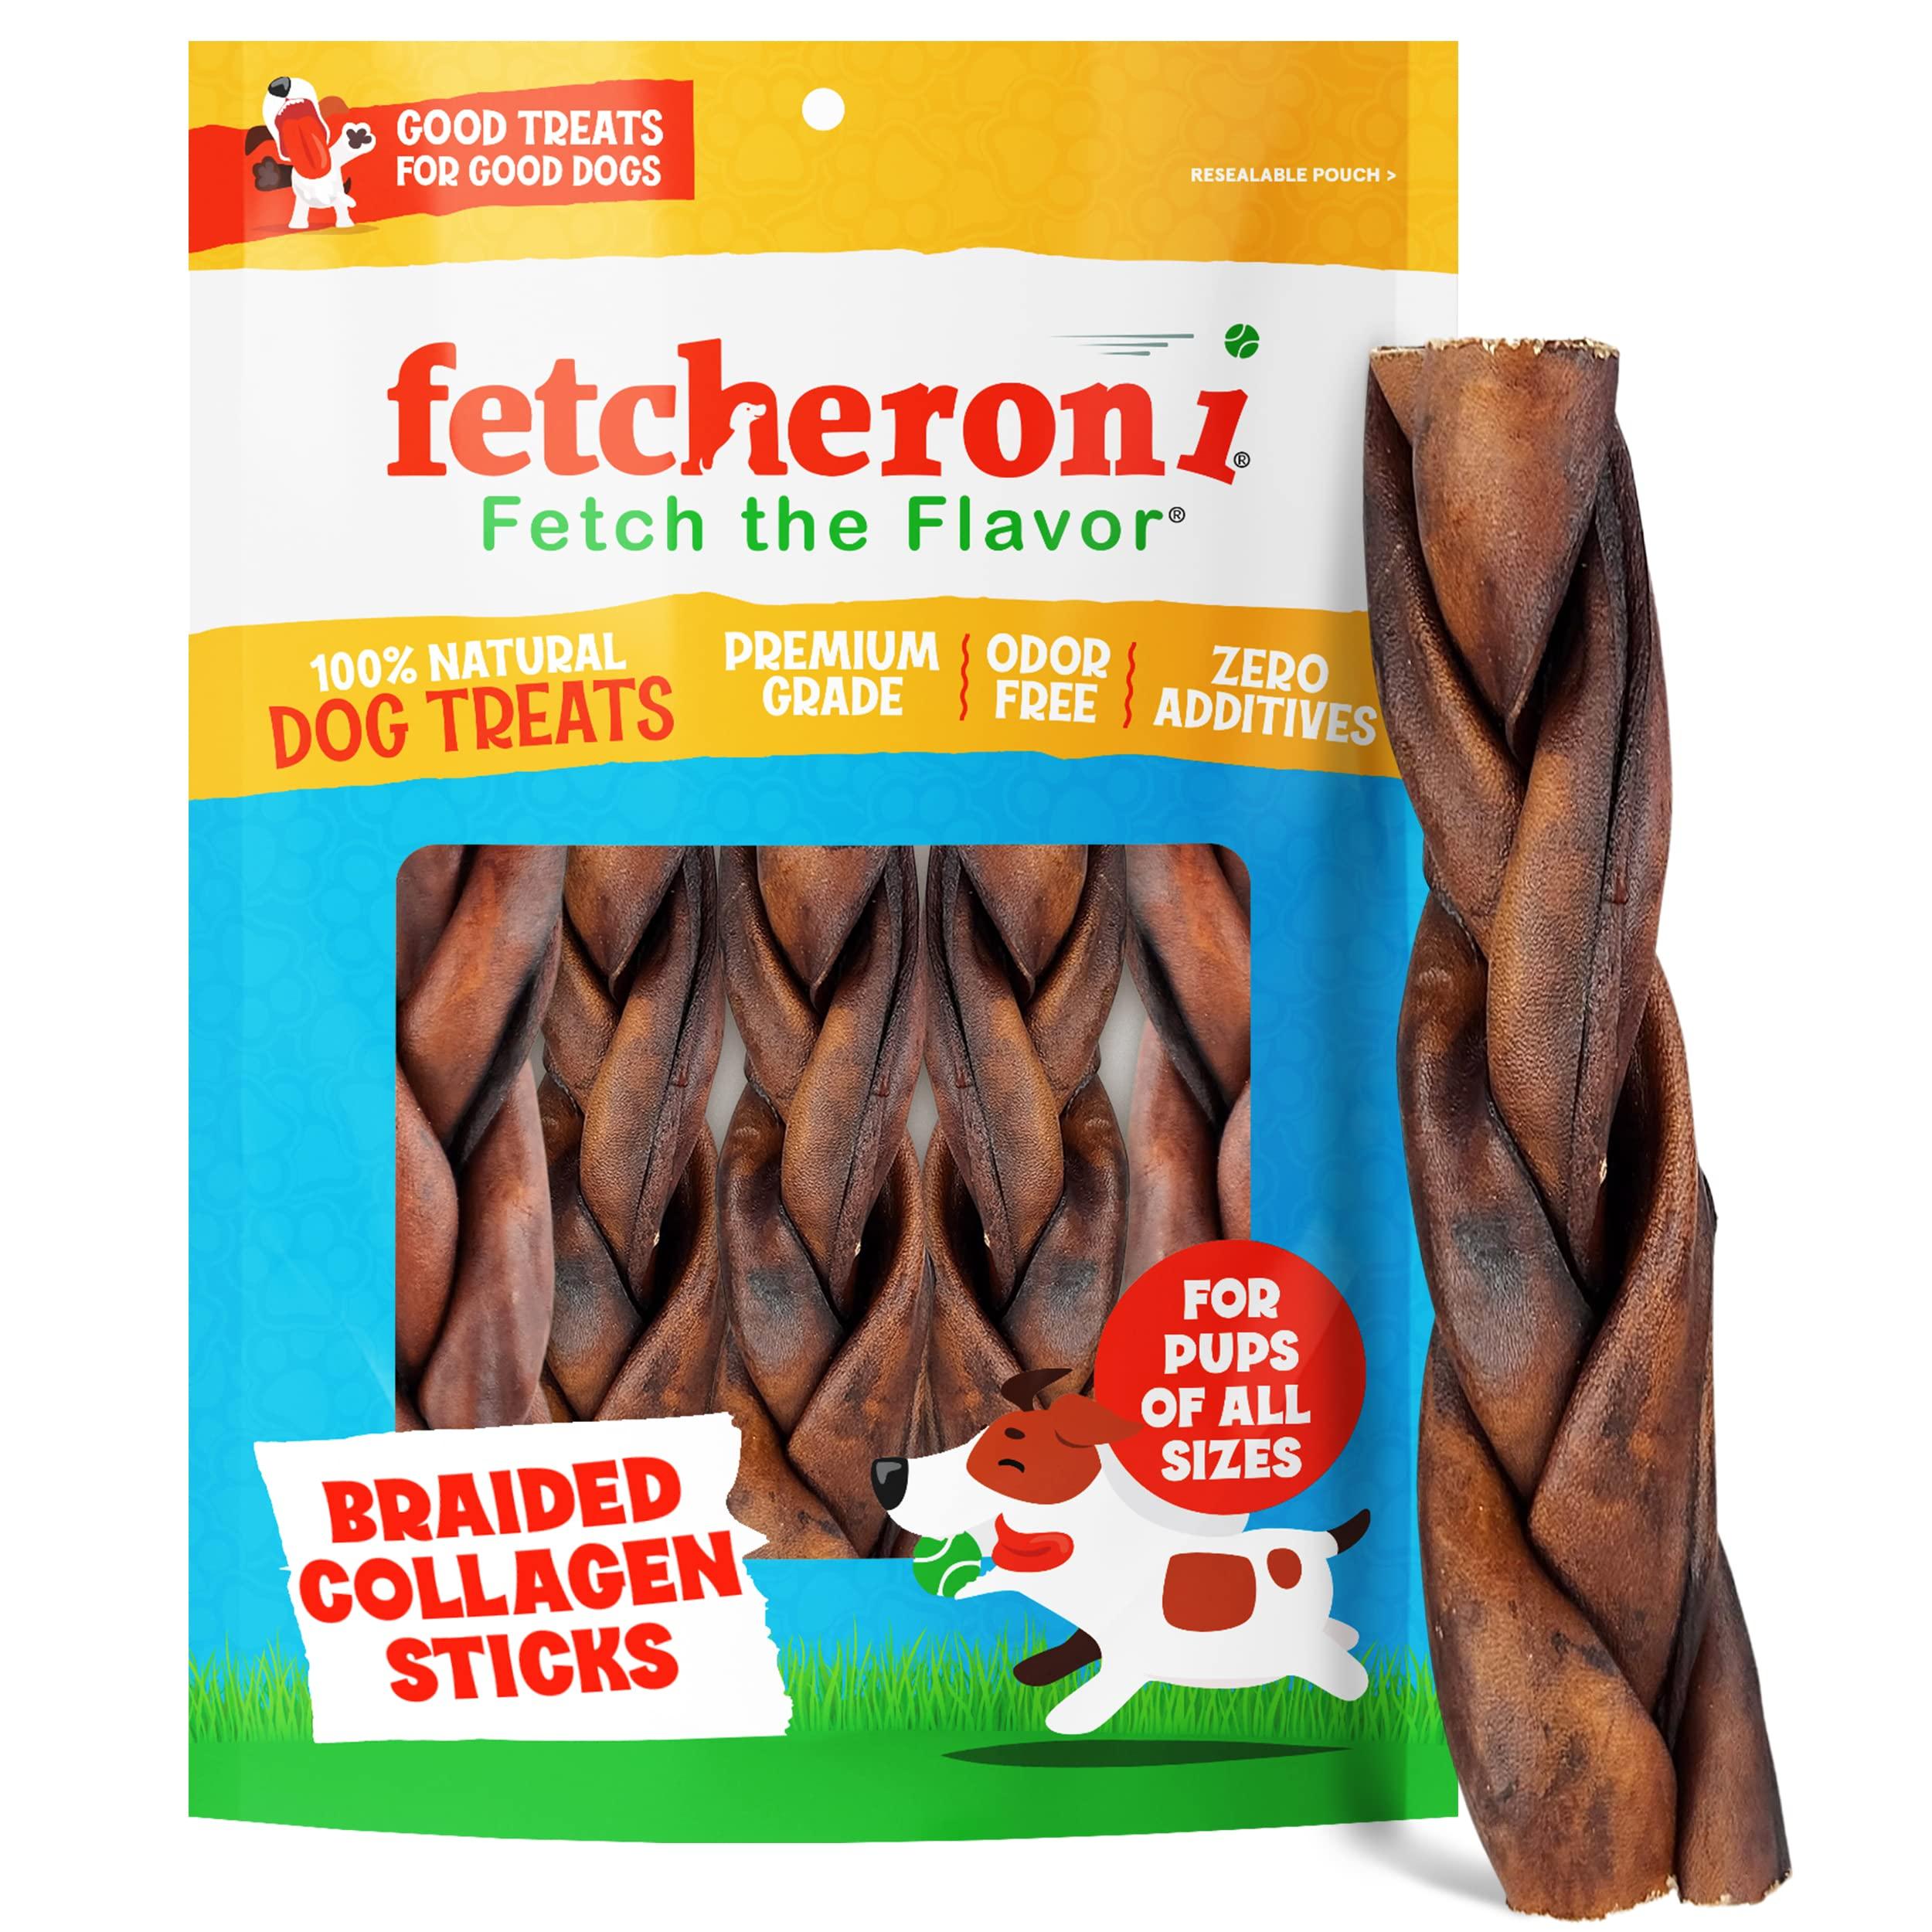 FETCHERONI Collagen Sticks for Dogs - Bully Sticks and Rawhide Alternative Treats, Long Lasting Dog Chews 6-inch Natural Braided Collagen for Dogs - 5-Pcs Pack Dog Dental Treats W/Beef Collagen